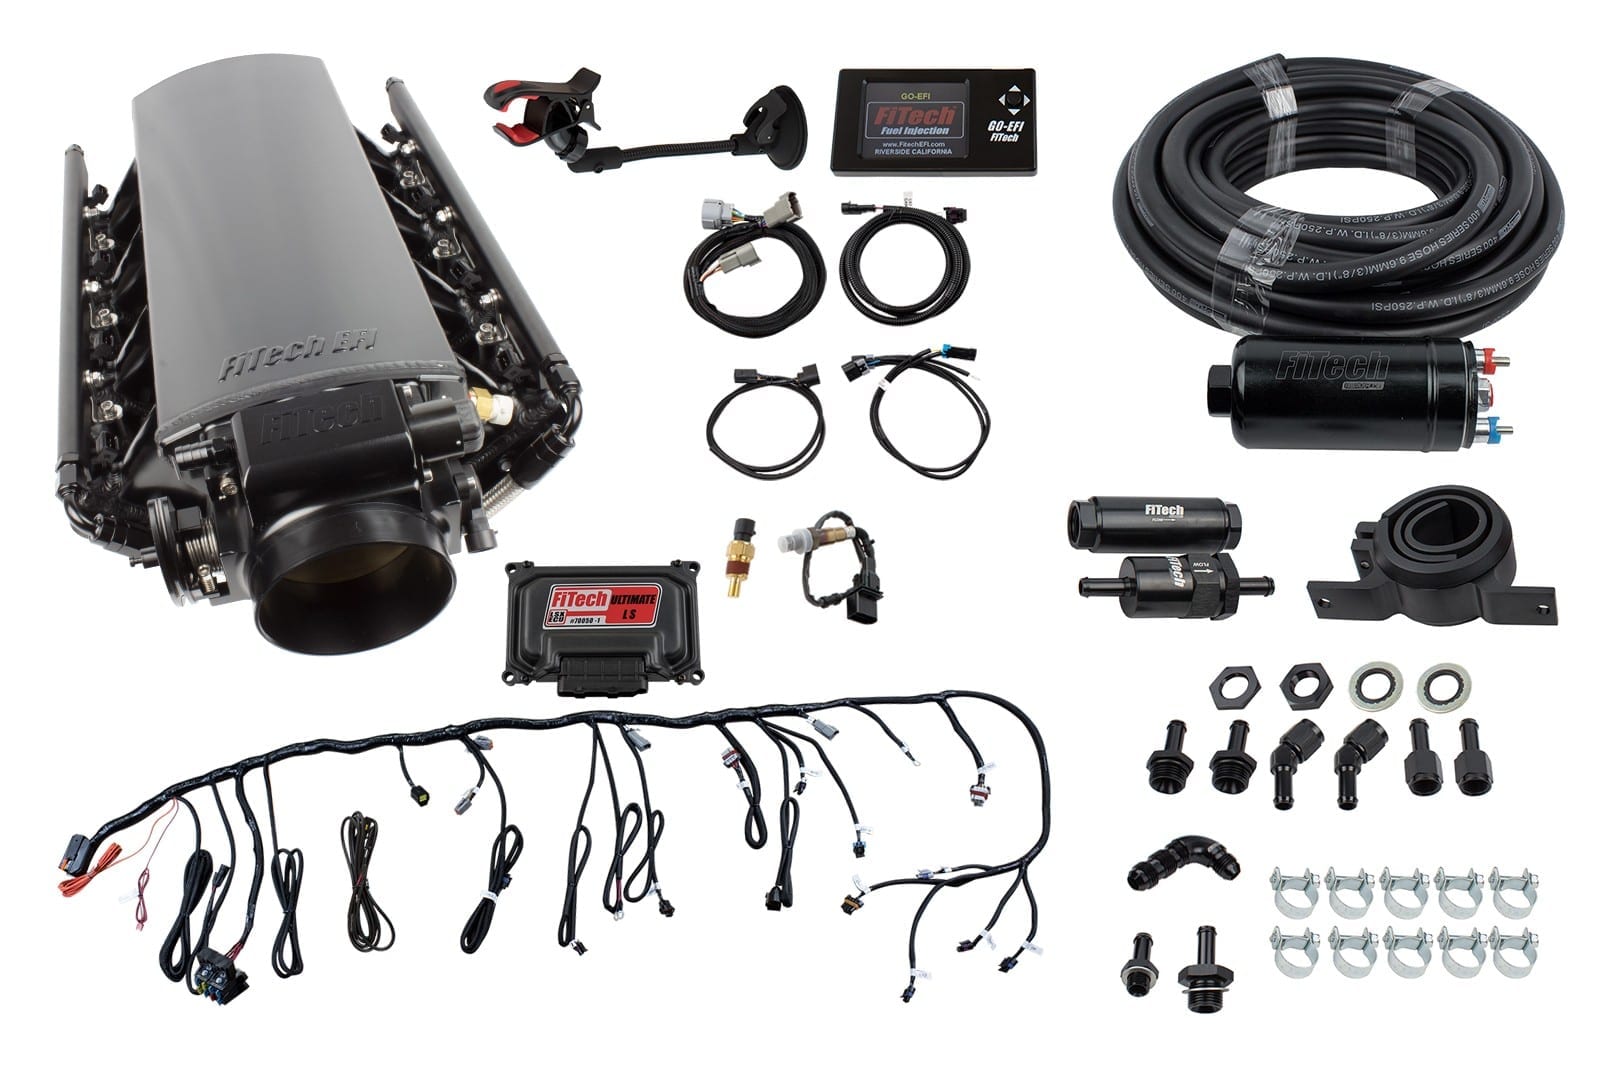 FiTech 71009 Ultimate LS Truck Kit (750HP/Trans Control/Inline Fuel Pump/Cathedral Port)